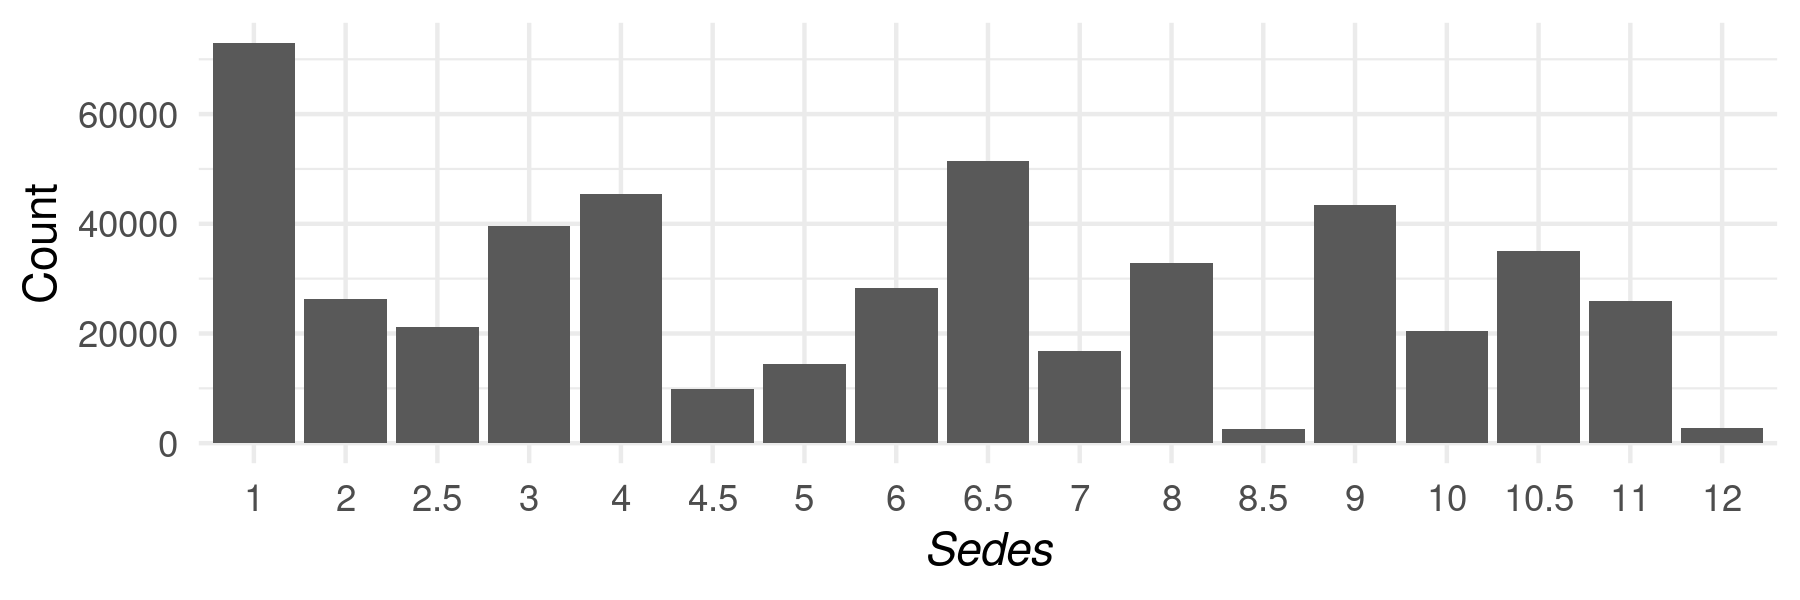 Bar chart of sedes frequencies.